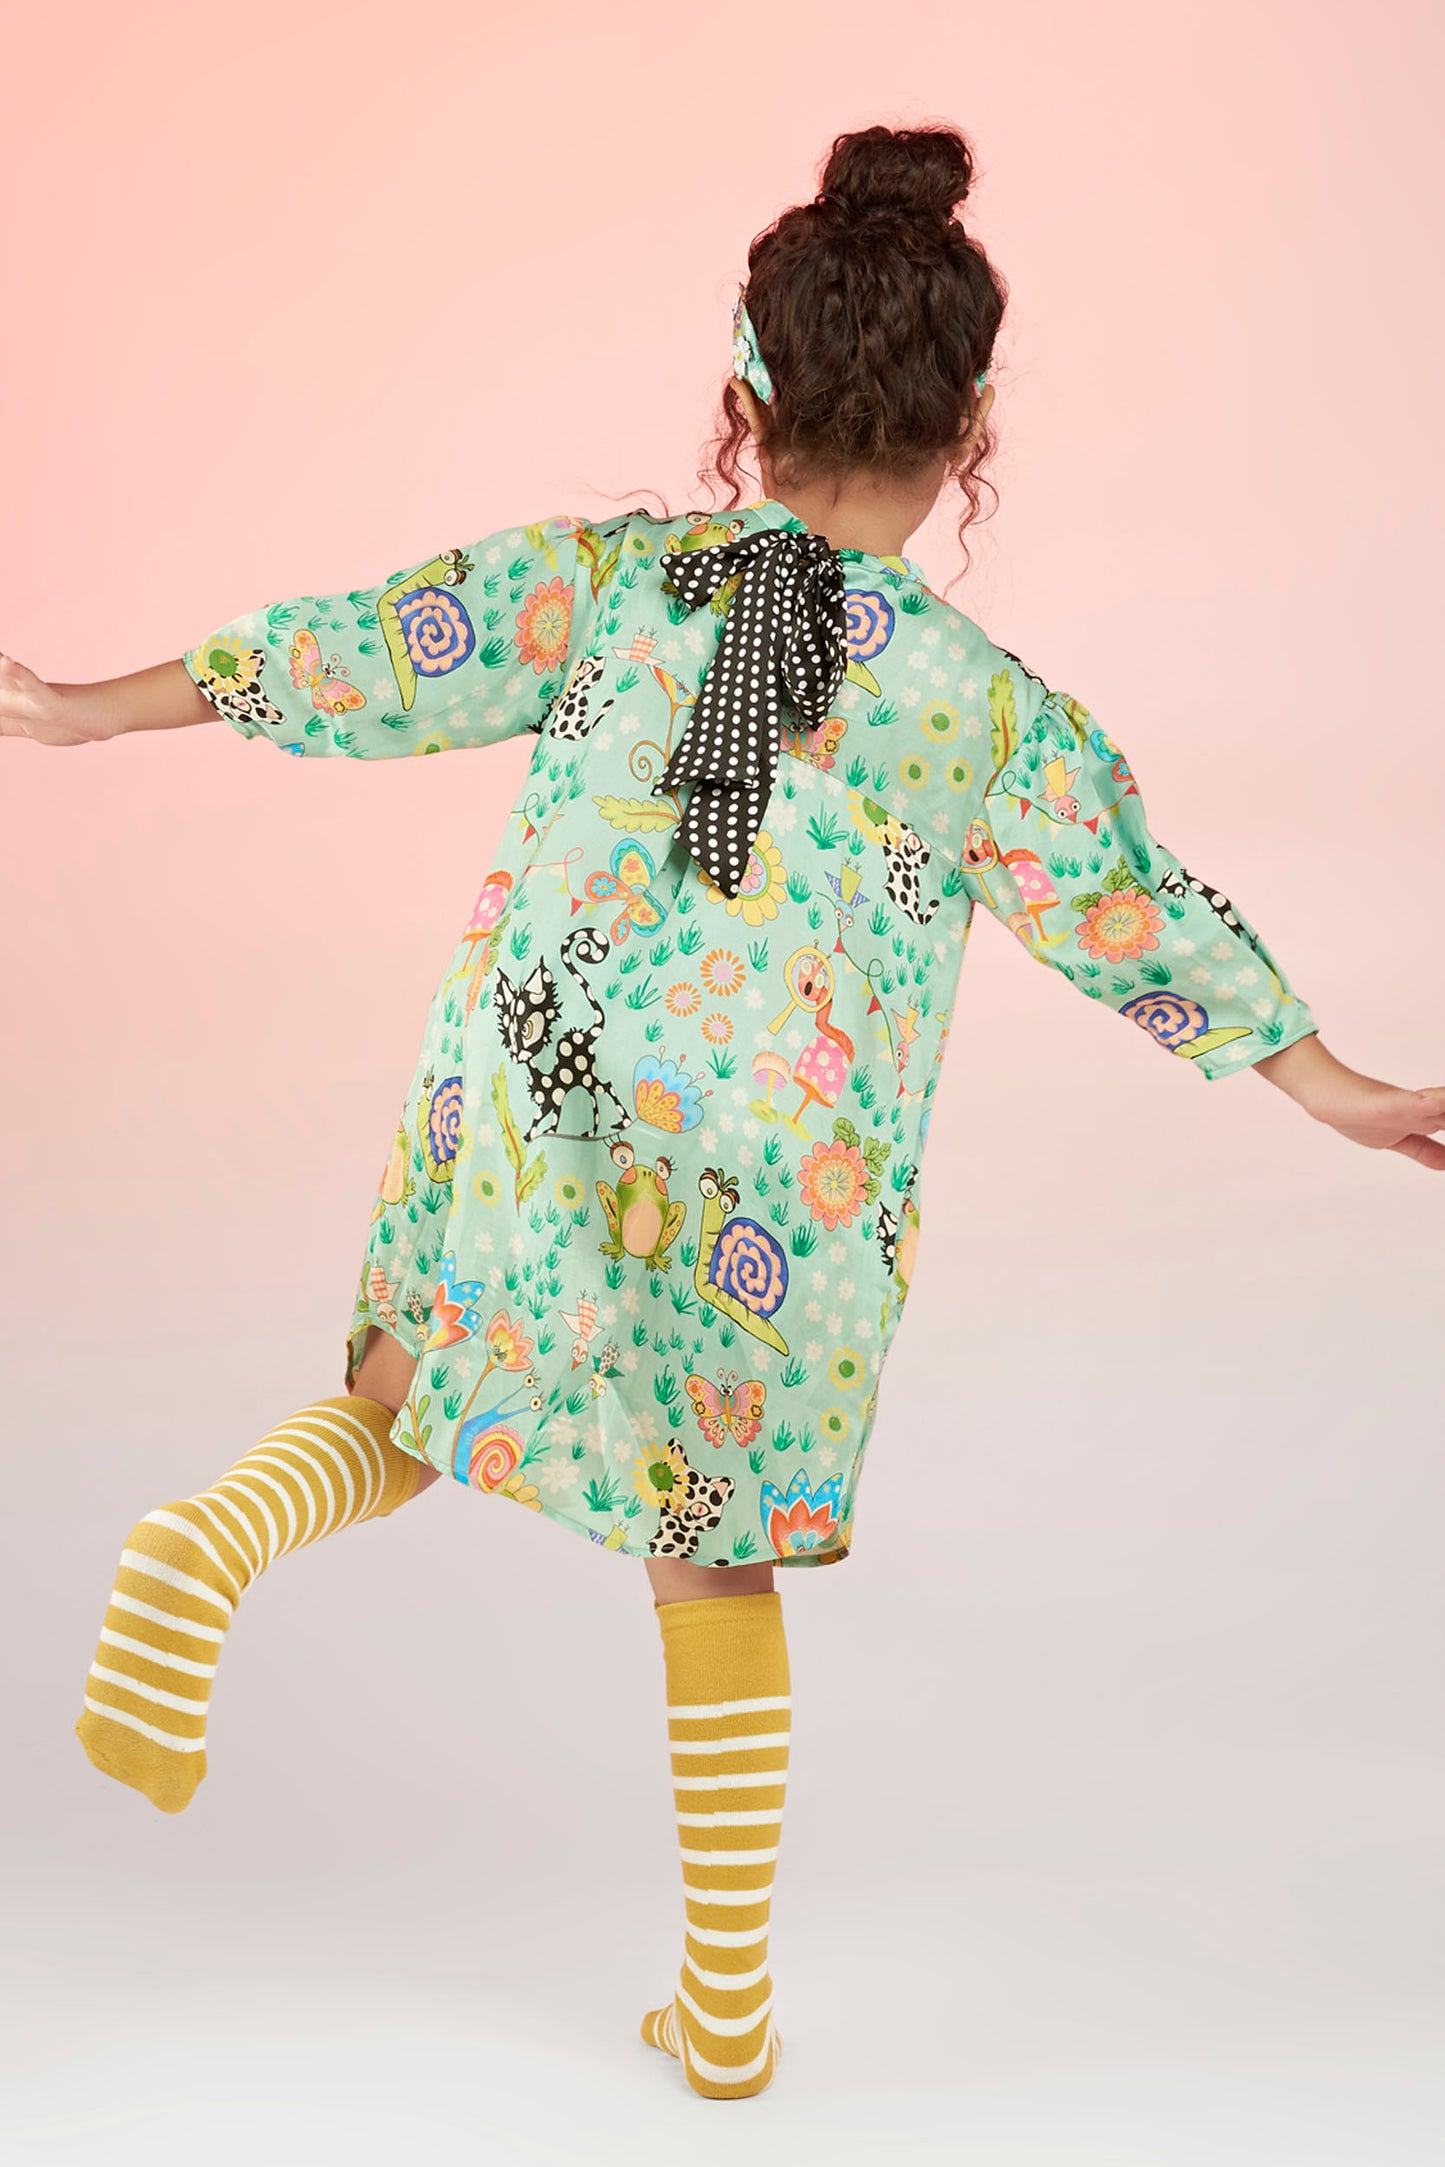 Once and Floral Printed Dress Mini Kids